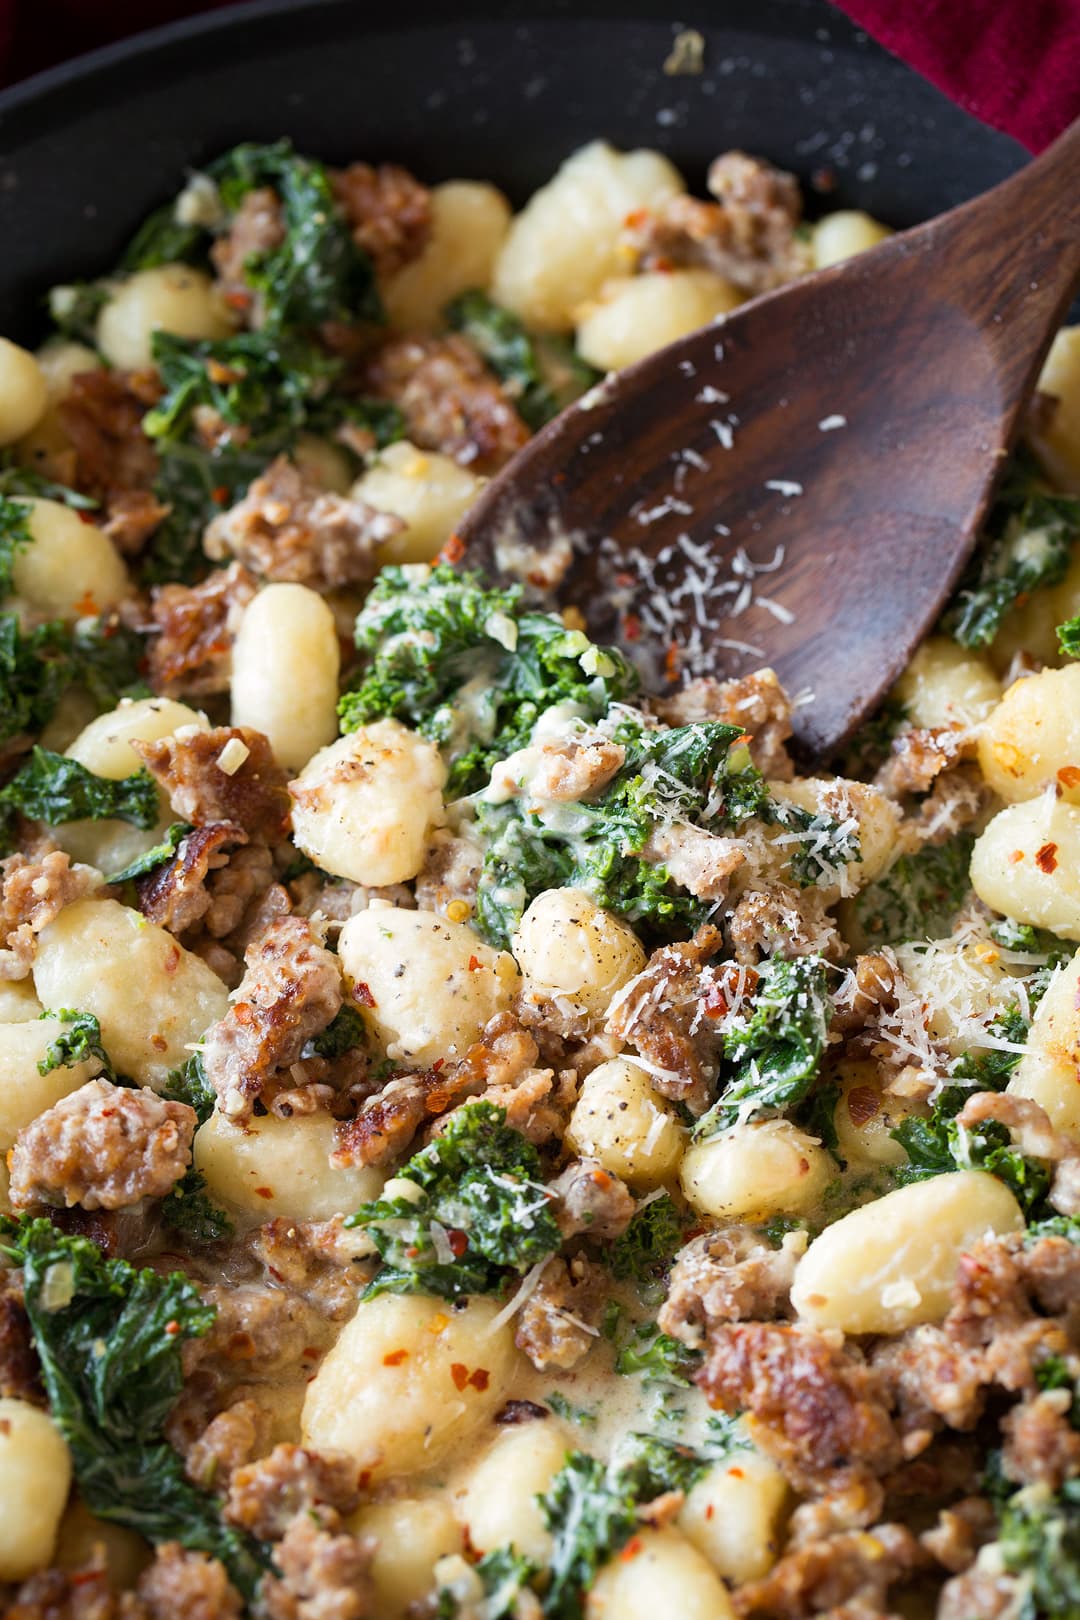 Gnocchi recipe with Italian sausage and kale shown here in a skillet with a wooden spoon for serving.